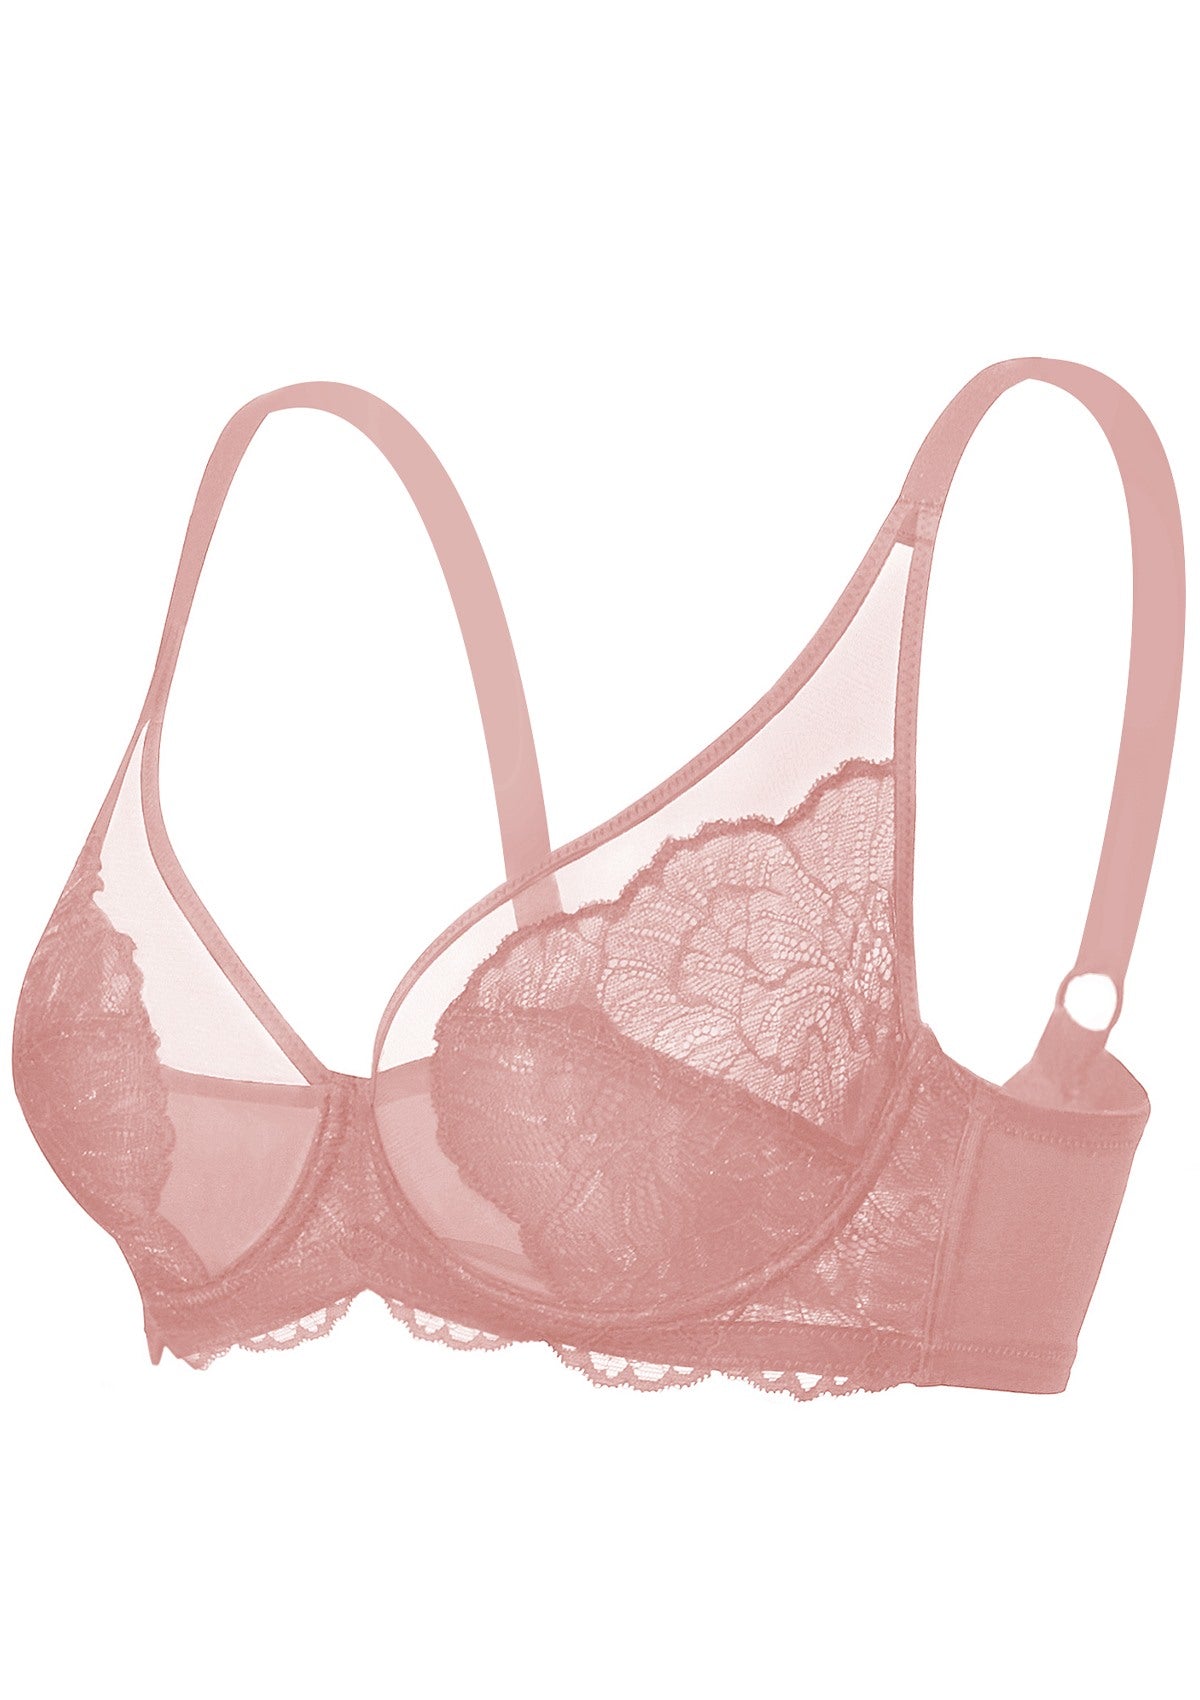 HSIA Blossom Unlined Lace Underwire Bra - Raspberry / 38 / D